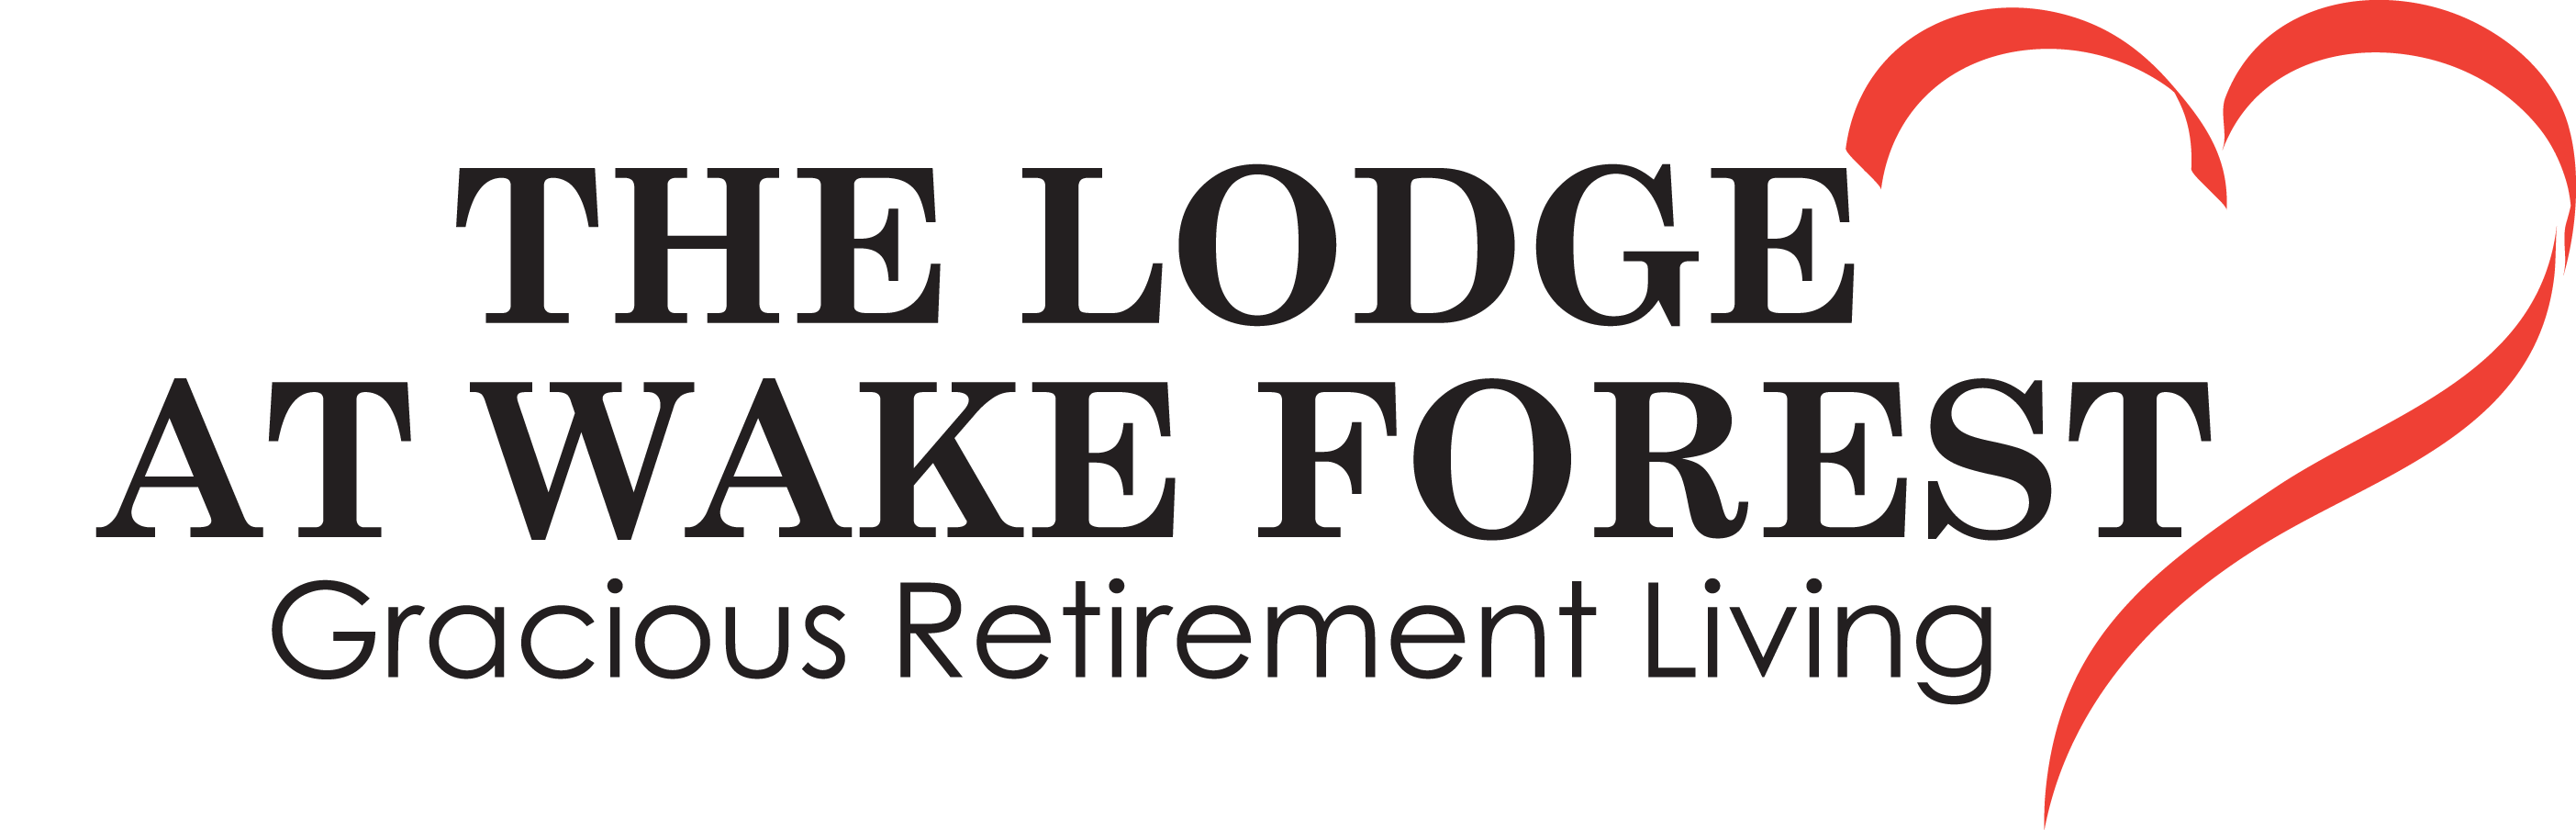 The Lodge at Wake Forest logo